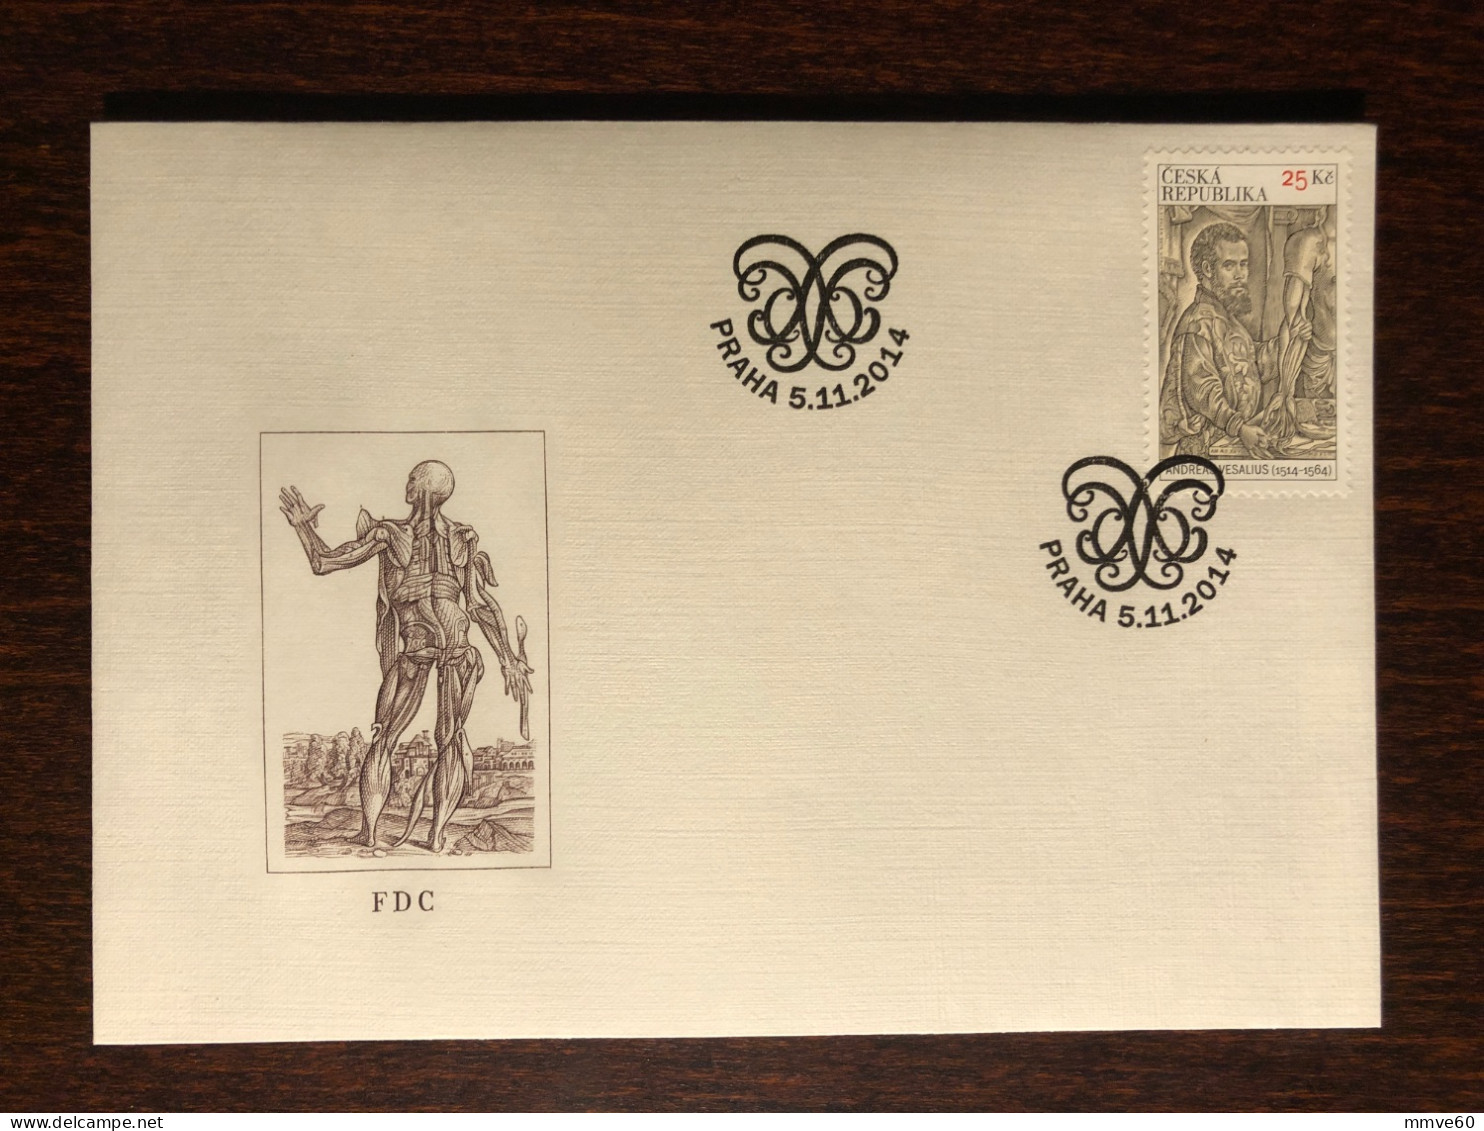 CZECH FDC COVER 2014 YEAR VESALIUS HISTORY OF MEDICINE HEALTH MEDICINE STAMPS - FDC